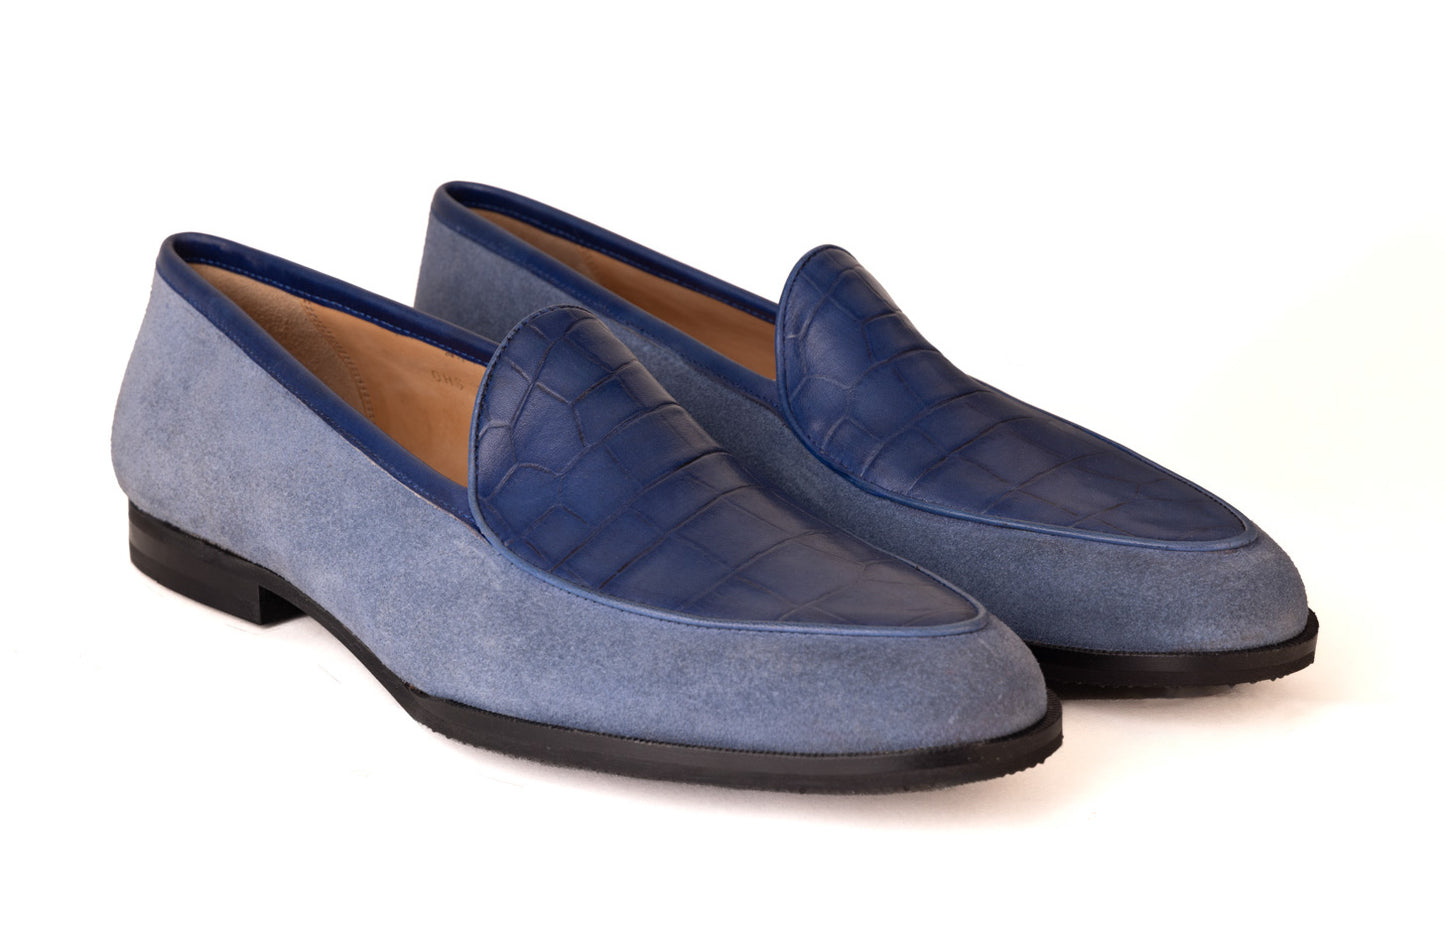 Loafer with Croc Textured Apron